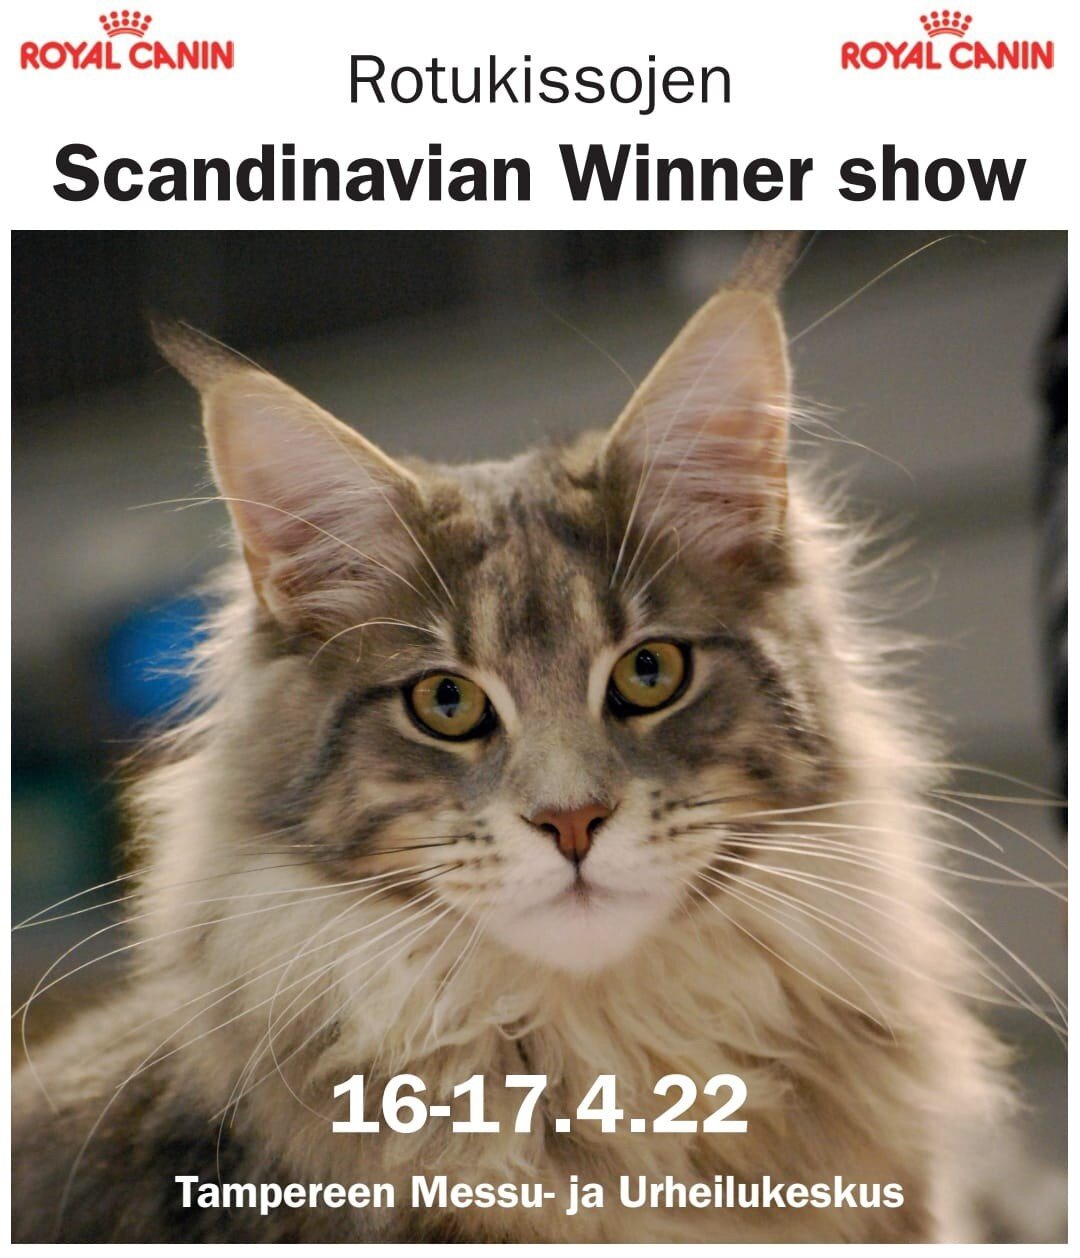 Come spend Easter with us in a purrrfect way! 😺🐾 Scandinavian Winner Show, Finland's biggest cat show, gathers almost 700 wonderful cats from 11 different countries in Tampere. Welcome to learn about different breeds and get to know cats as a hobby